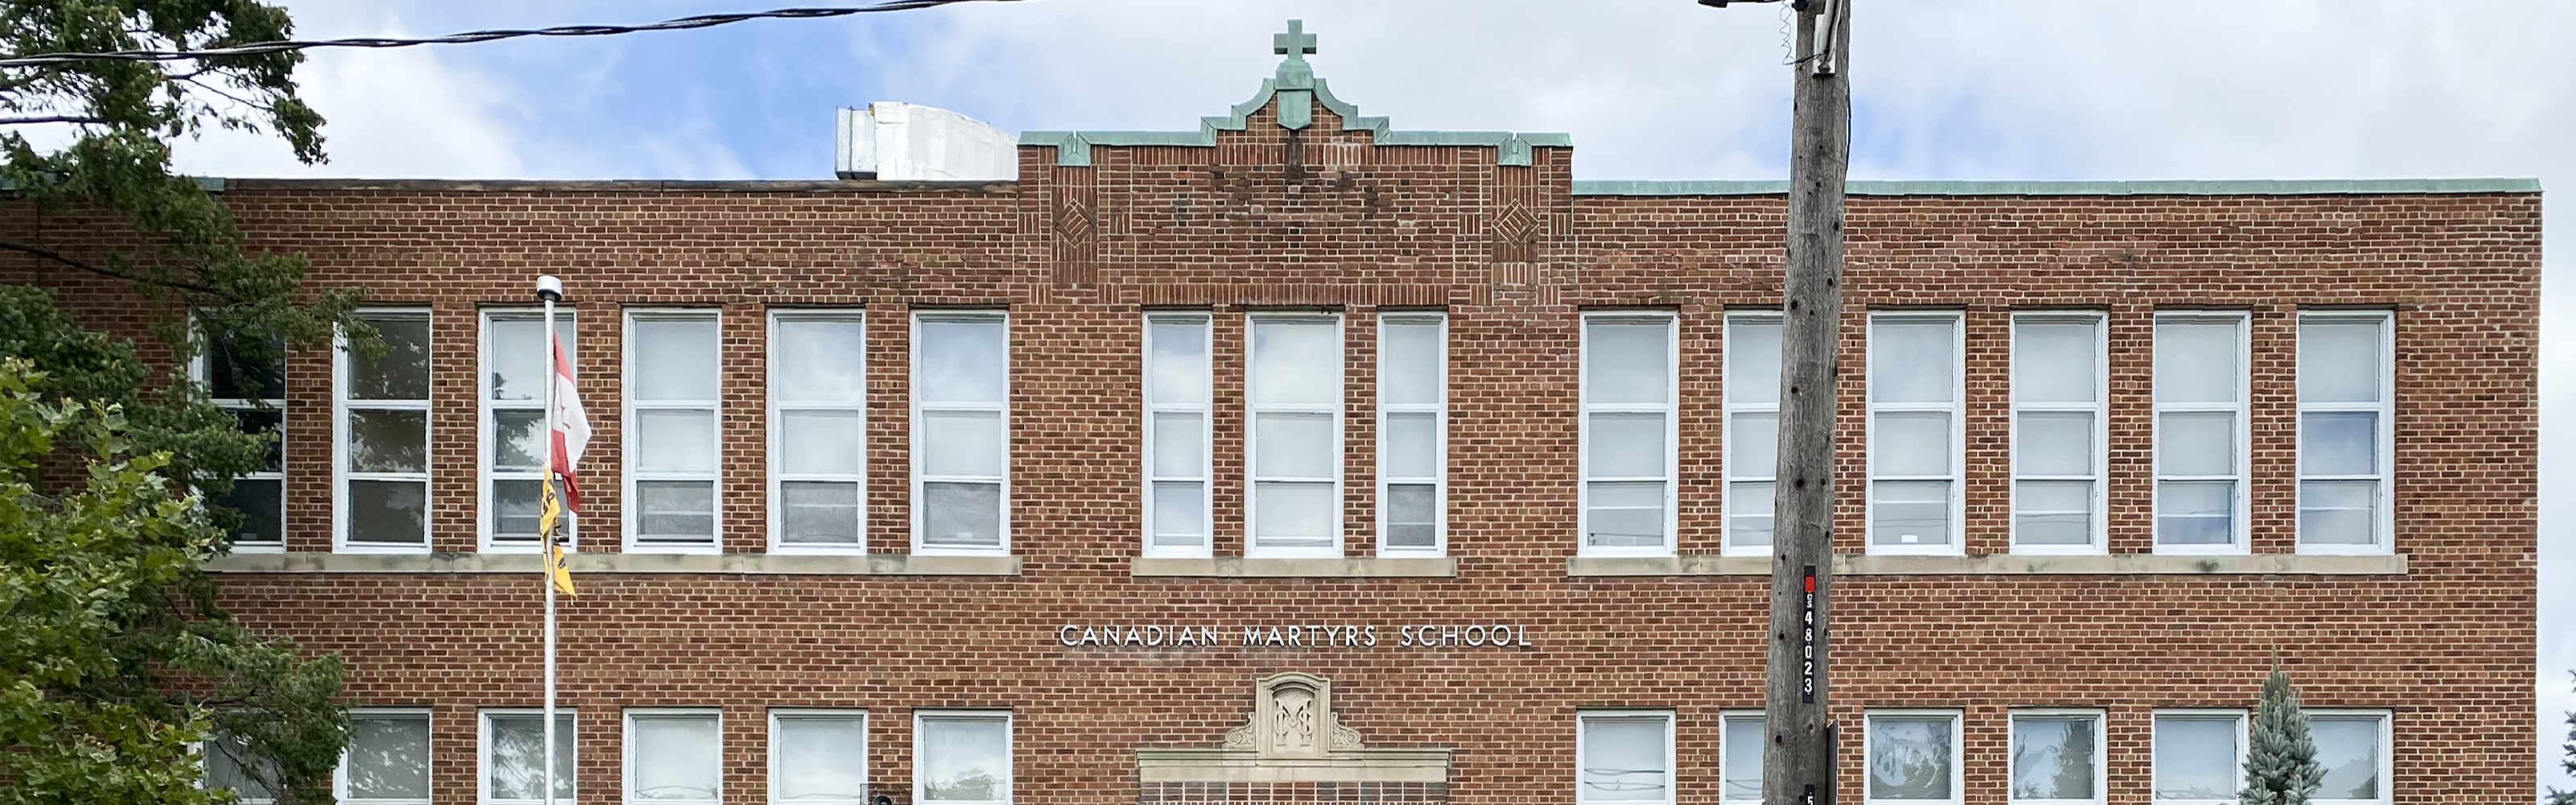 Front of the Canadian Martyrs Catholic School building